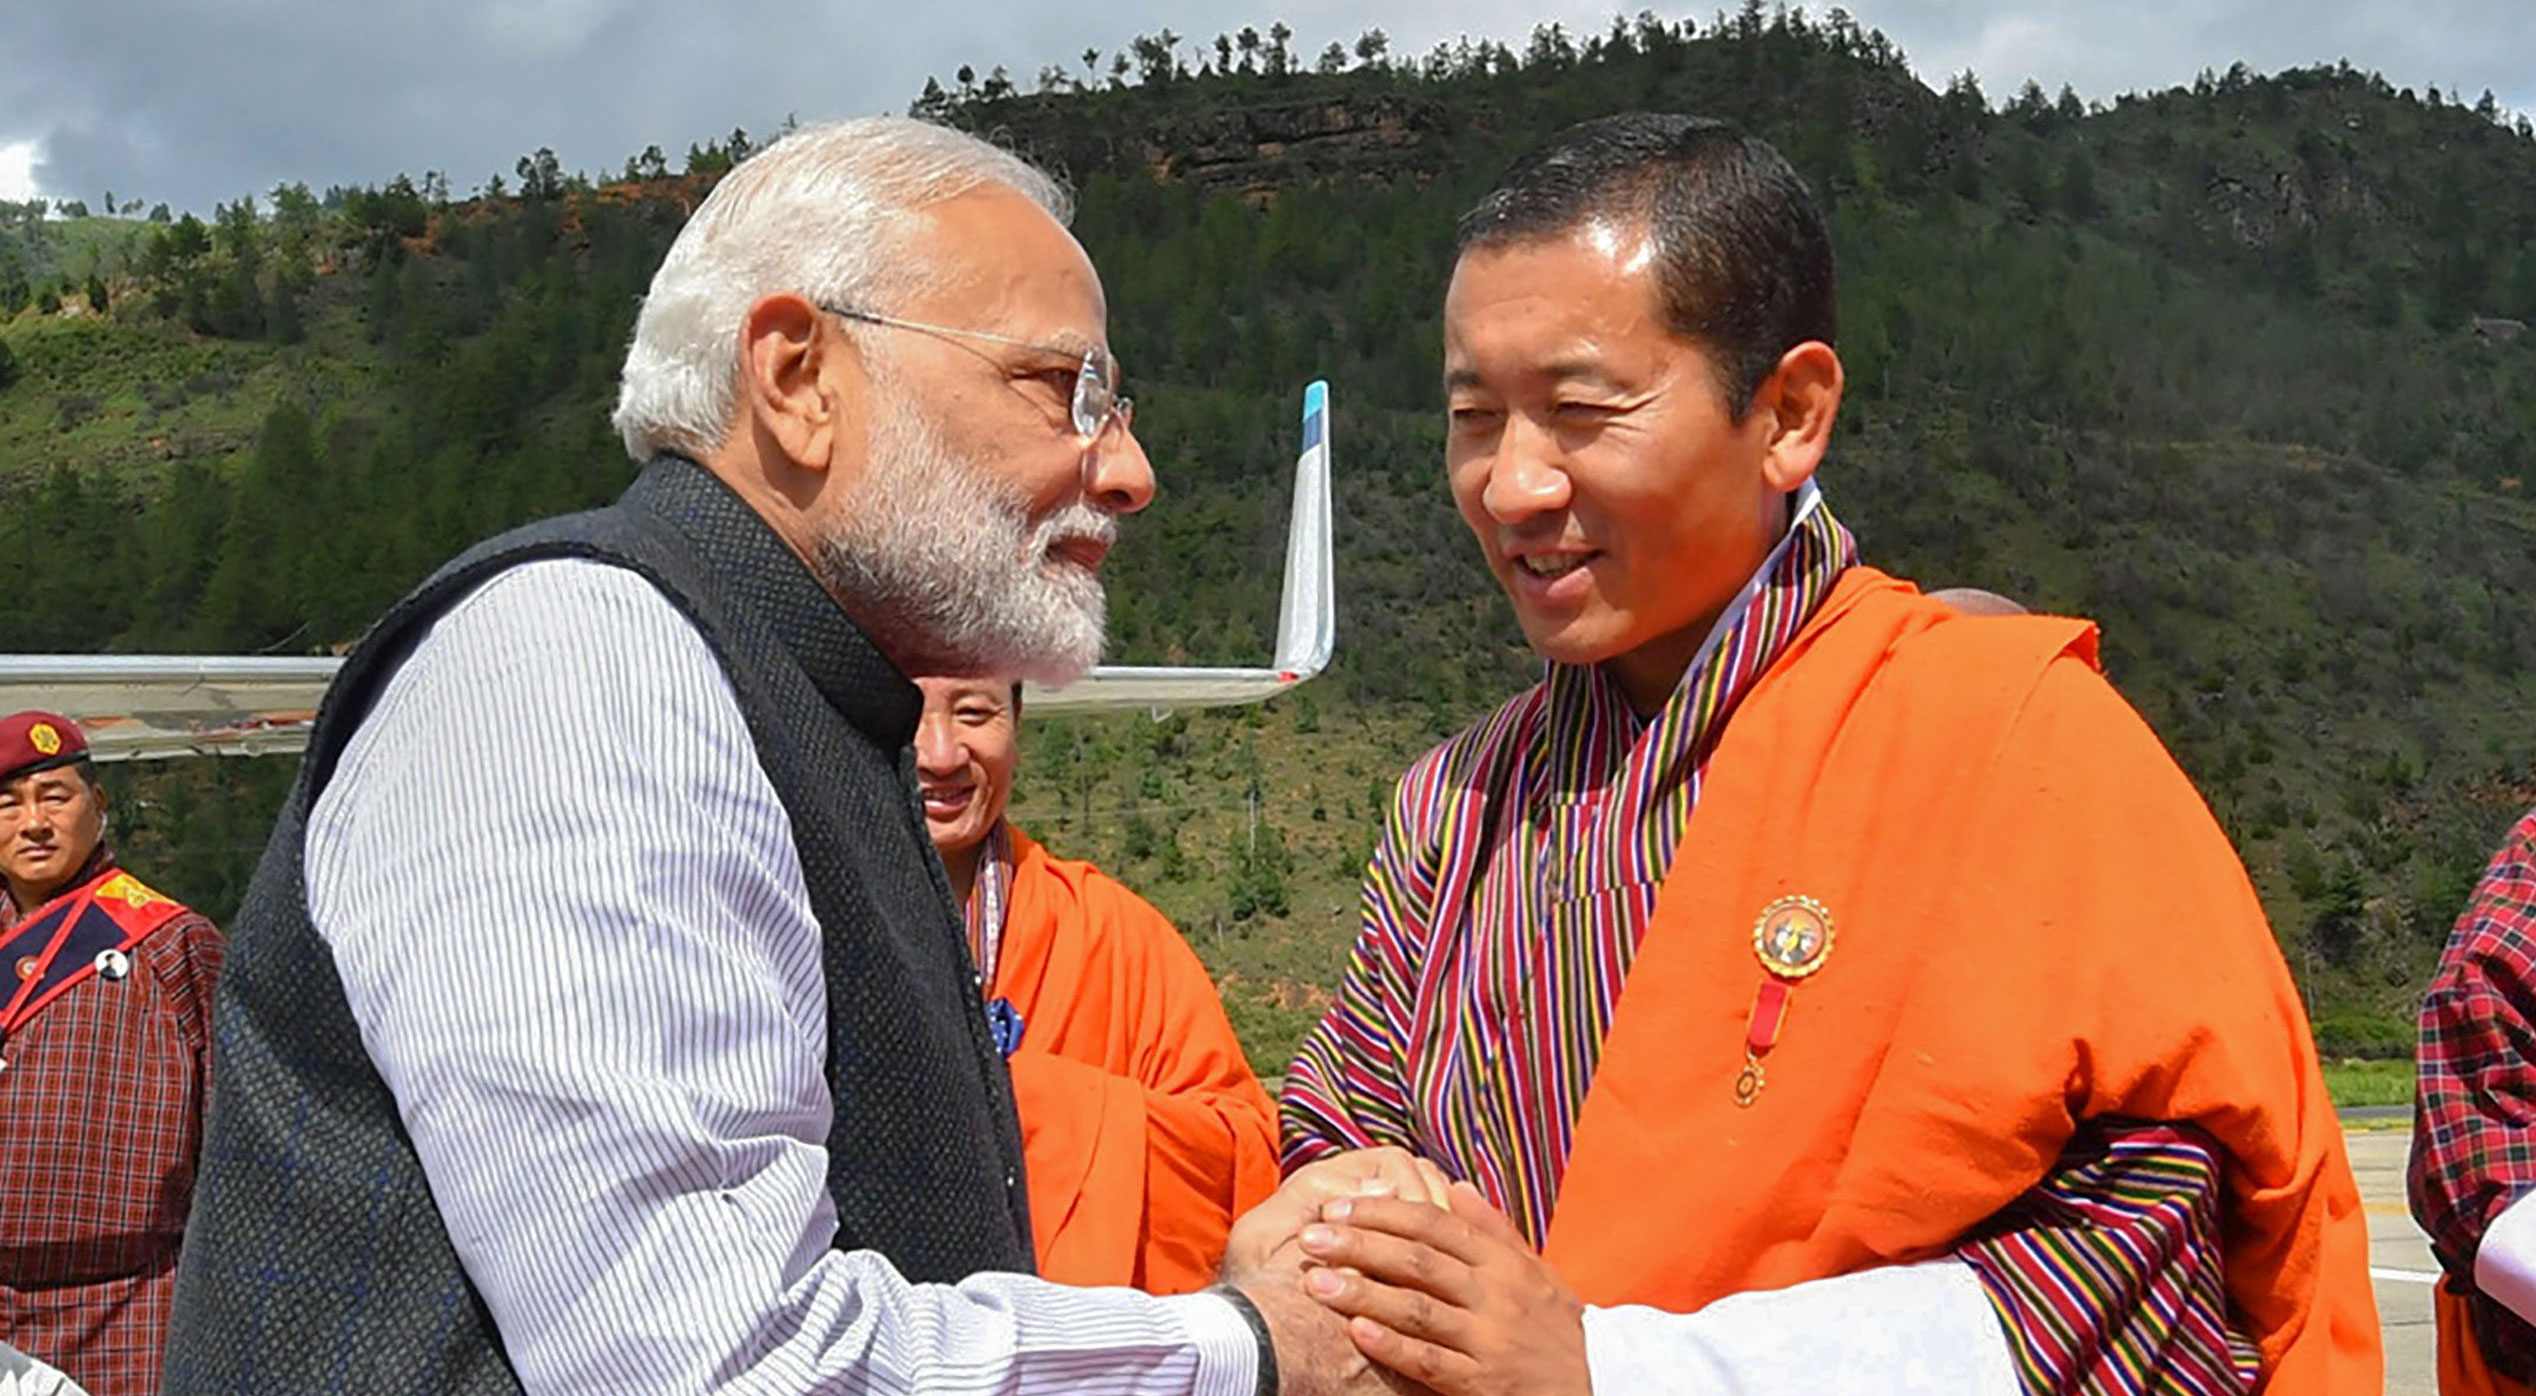 Prime Minister Narendra Modi greeted by dignitaries as he prepares to leave for Delhi, in Thimphu, on August 18, 2019.